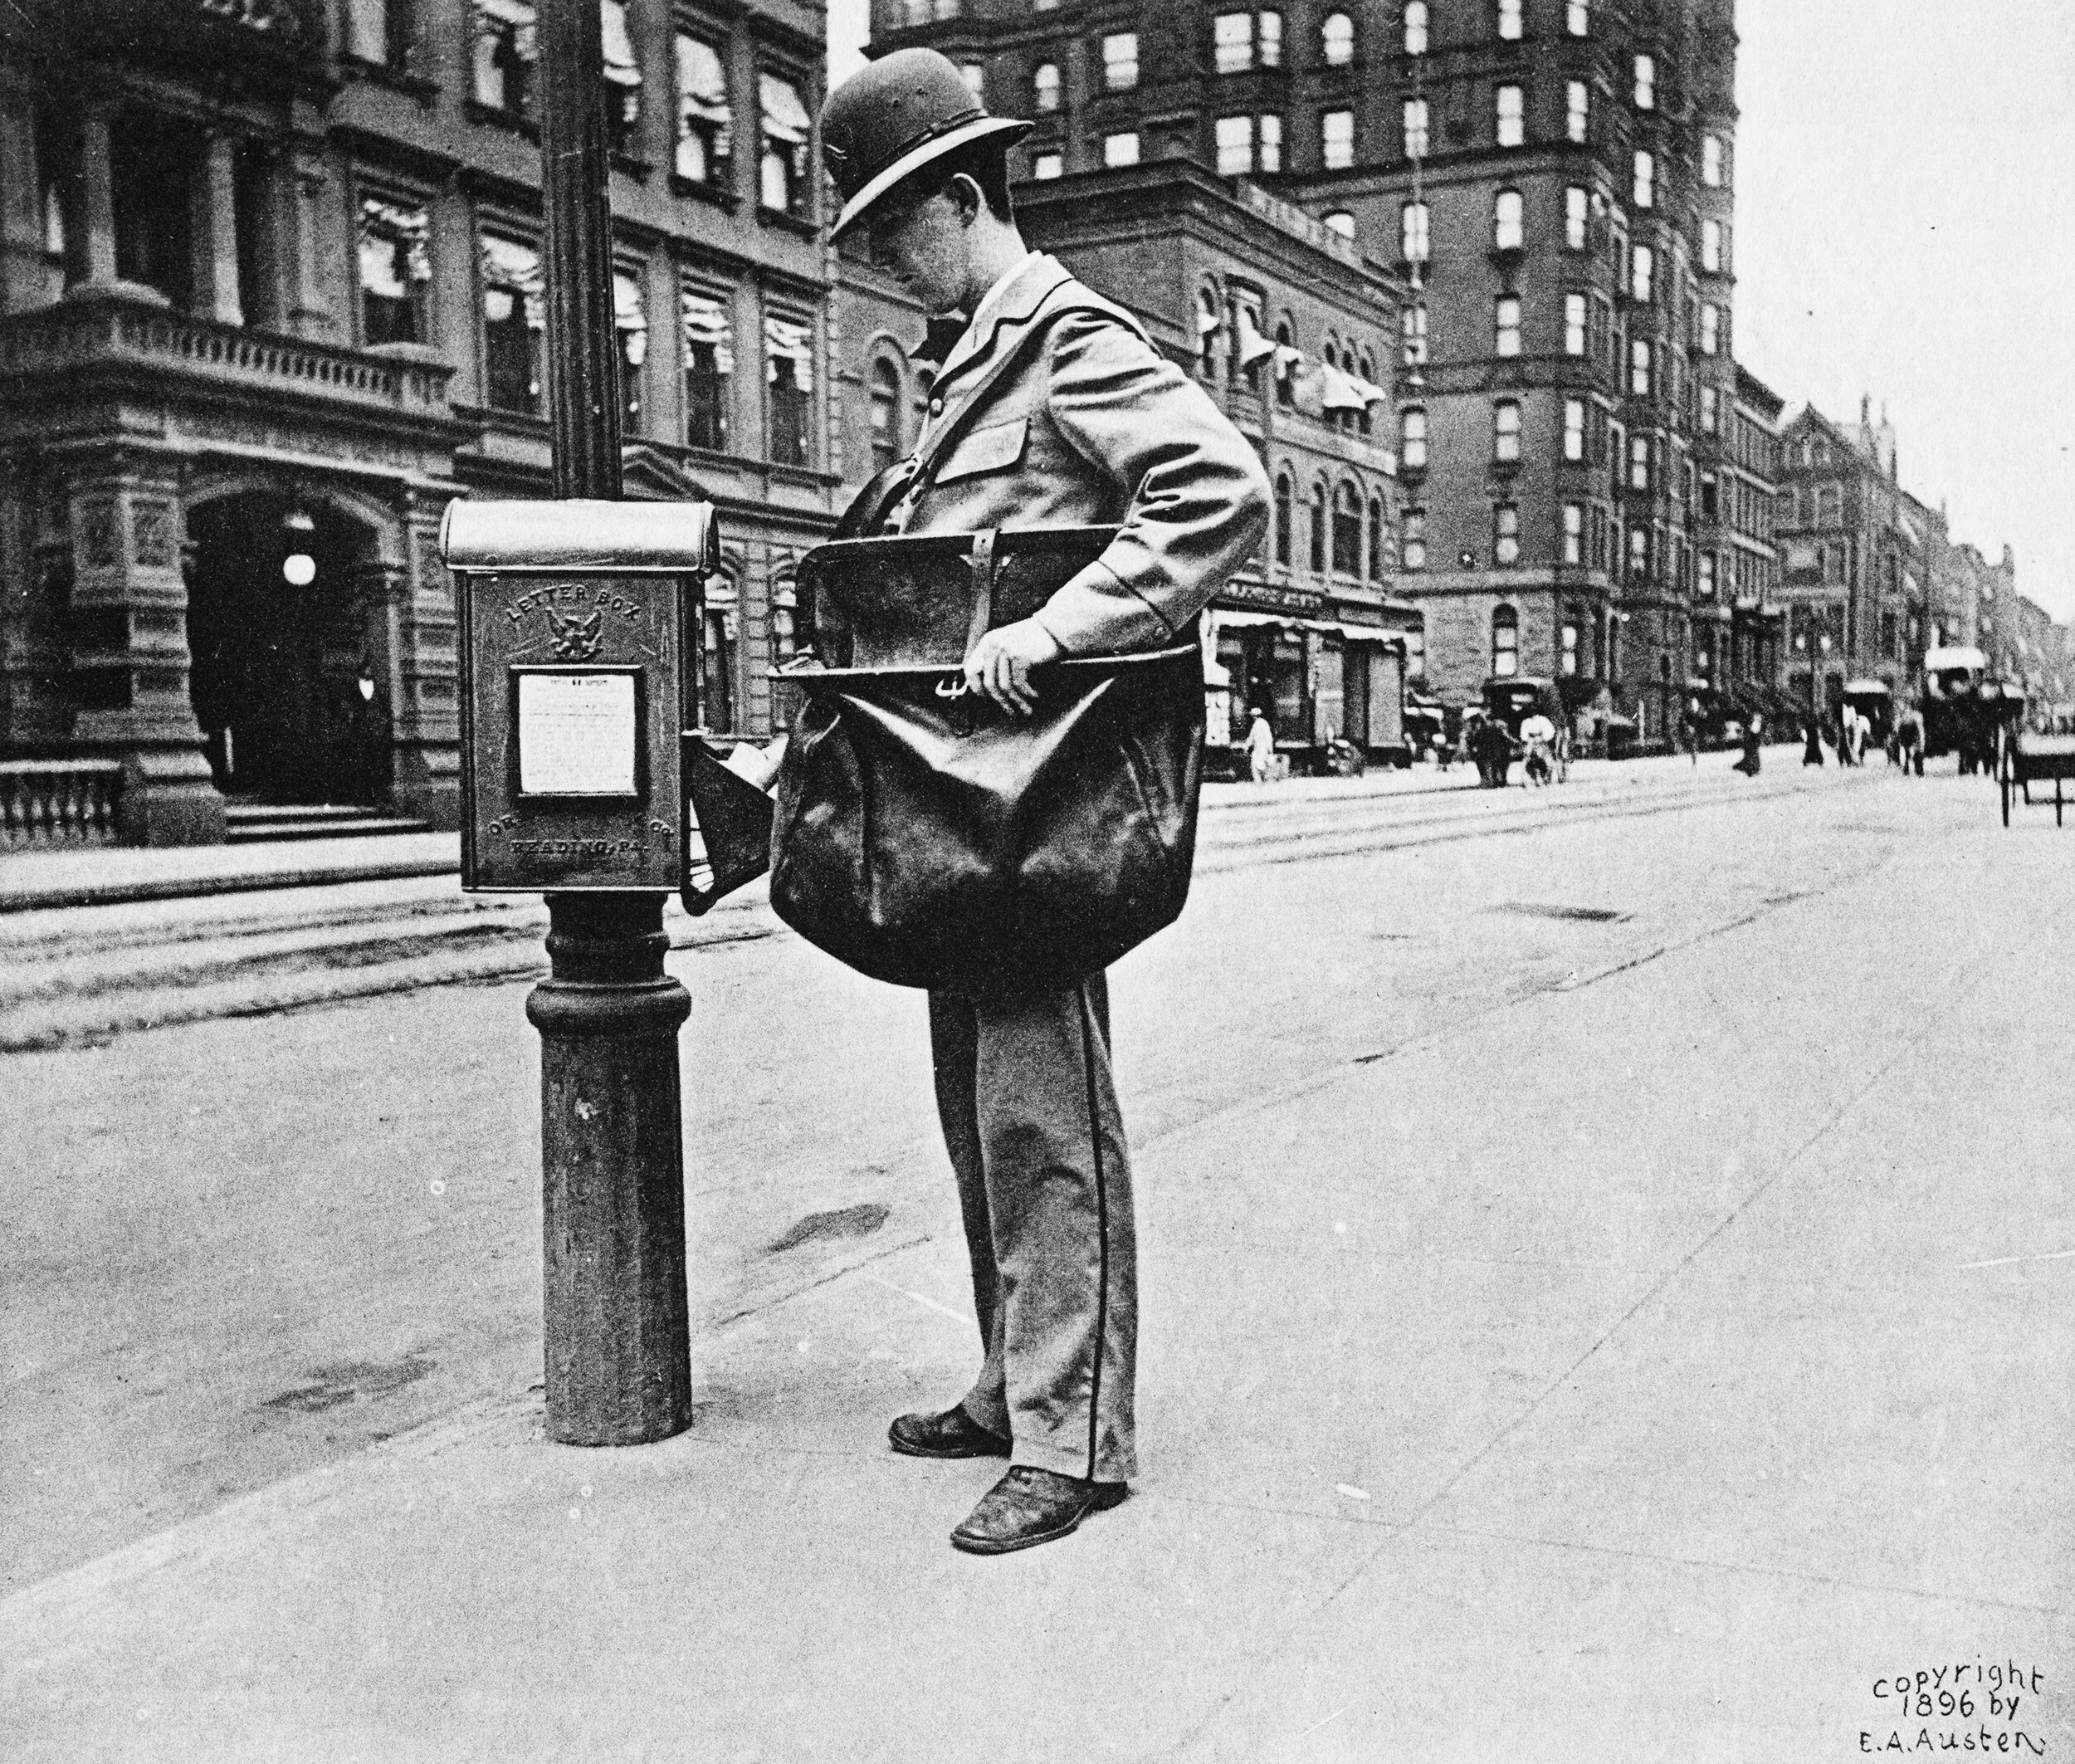   Postman, Fifty-sixth Street and Madison Avenue  Collection of Historic Richmond Town, 50.015.2169 